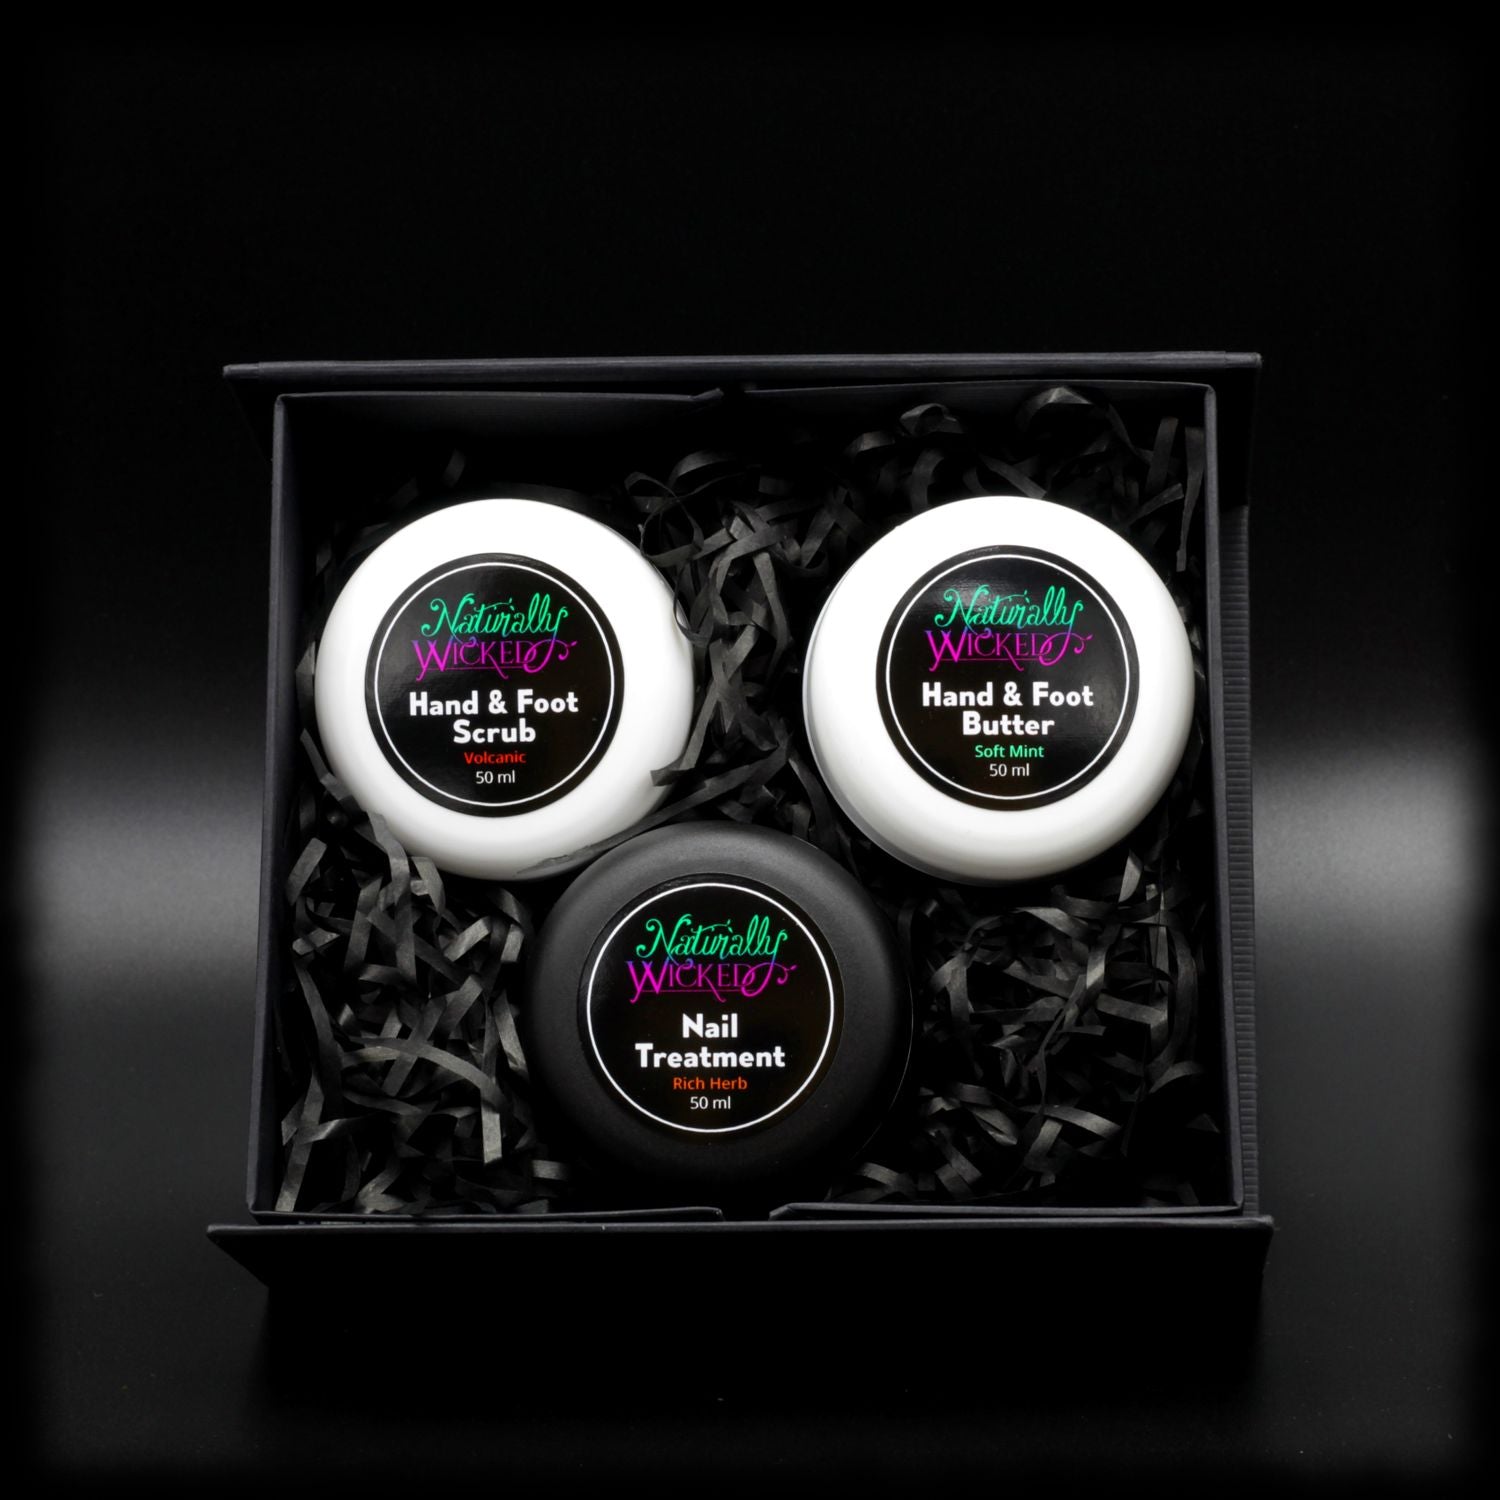 Naturally Wicked Original 3 Step Hand & Foot Kit Inner With Volcanic Hand & Foot Scrub, Rich Herb Nail Treatment & Soft Mint Hand & Foot Butter In Black Gift Packaged Box